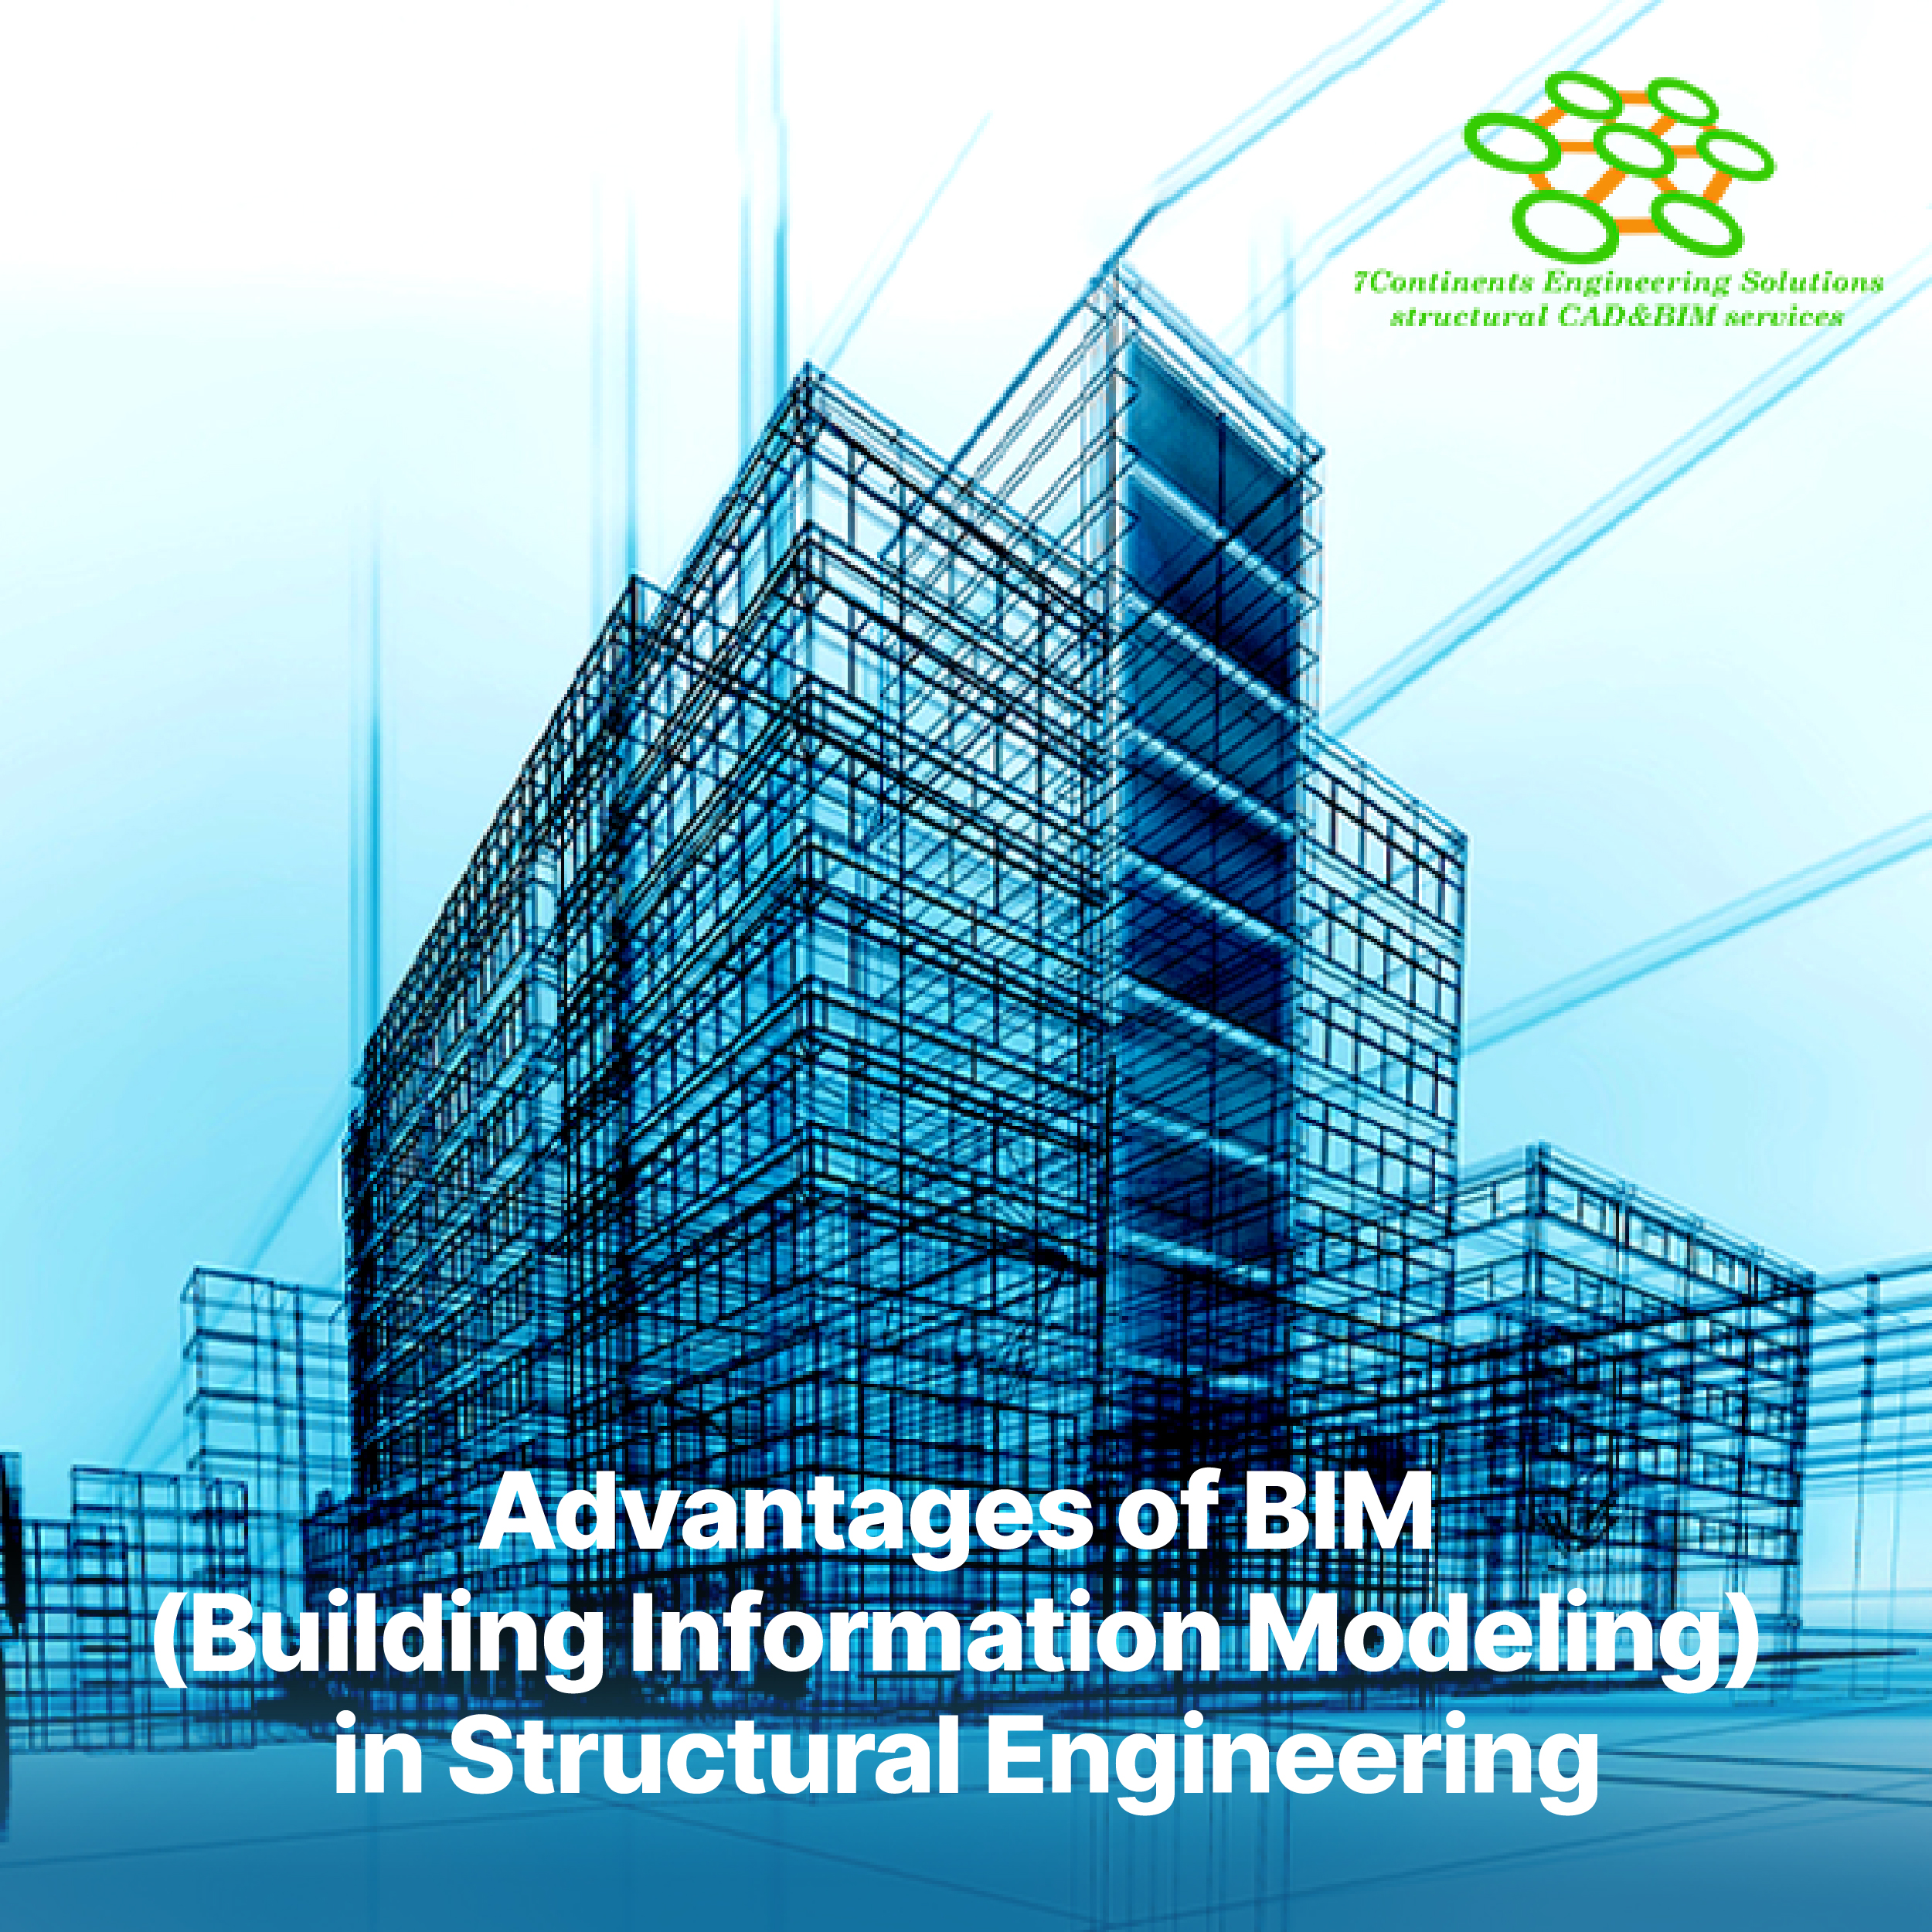 Advantages of BIM (Building Information Modeling) in Structural Engineering